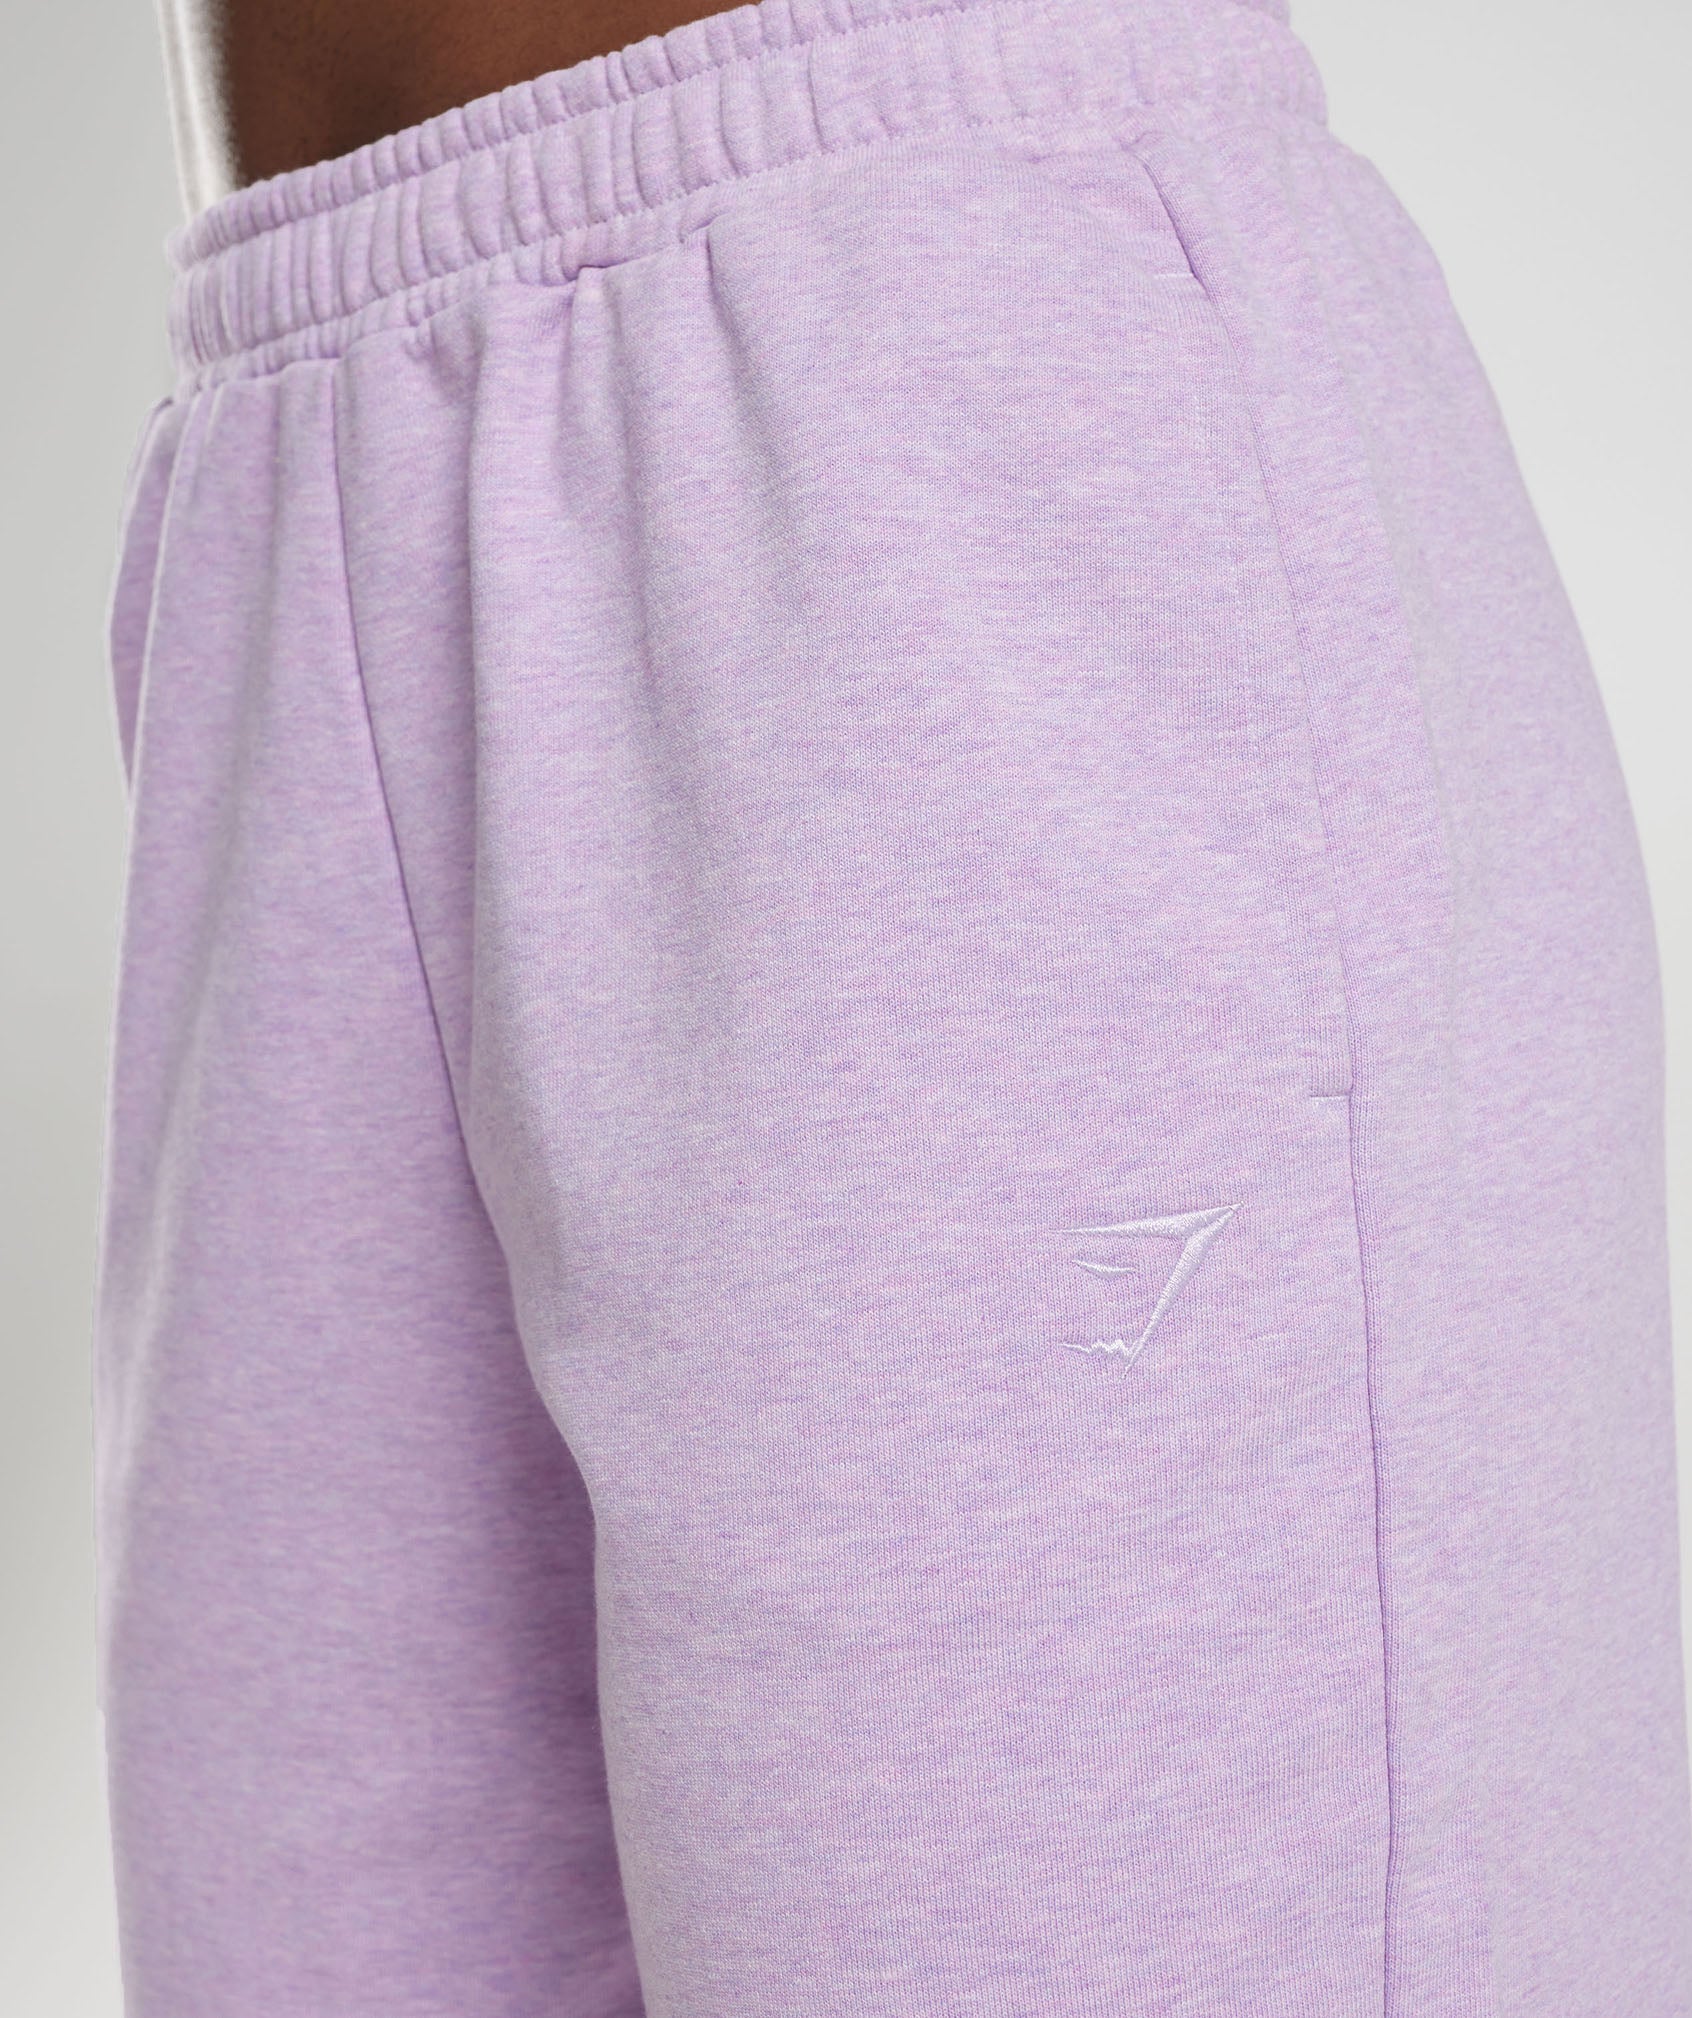 Rest Day Sweats Joggers in Aura Lilac Marl